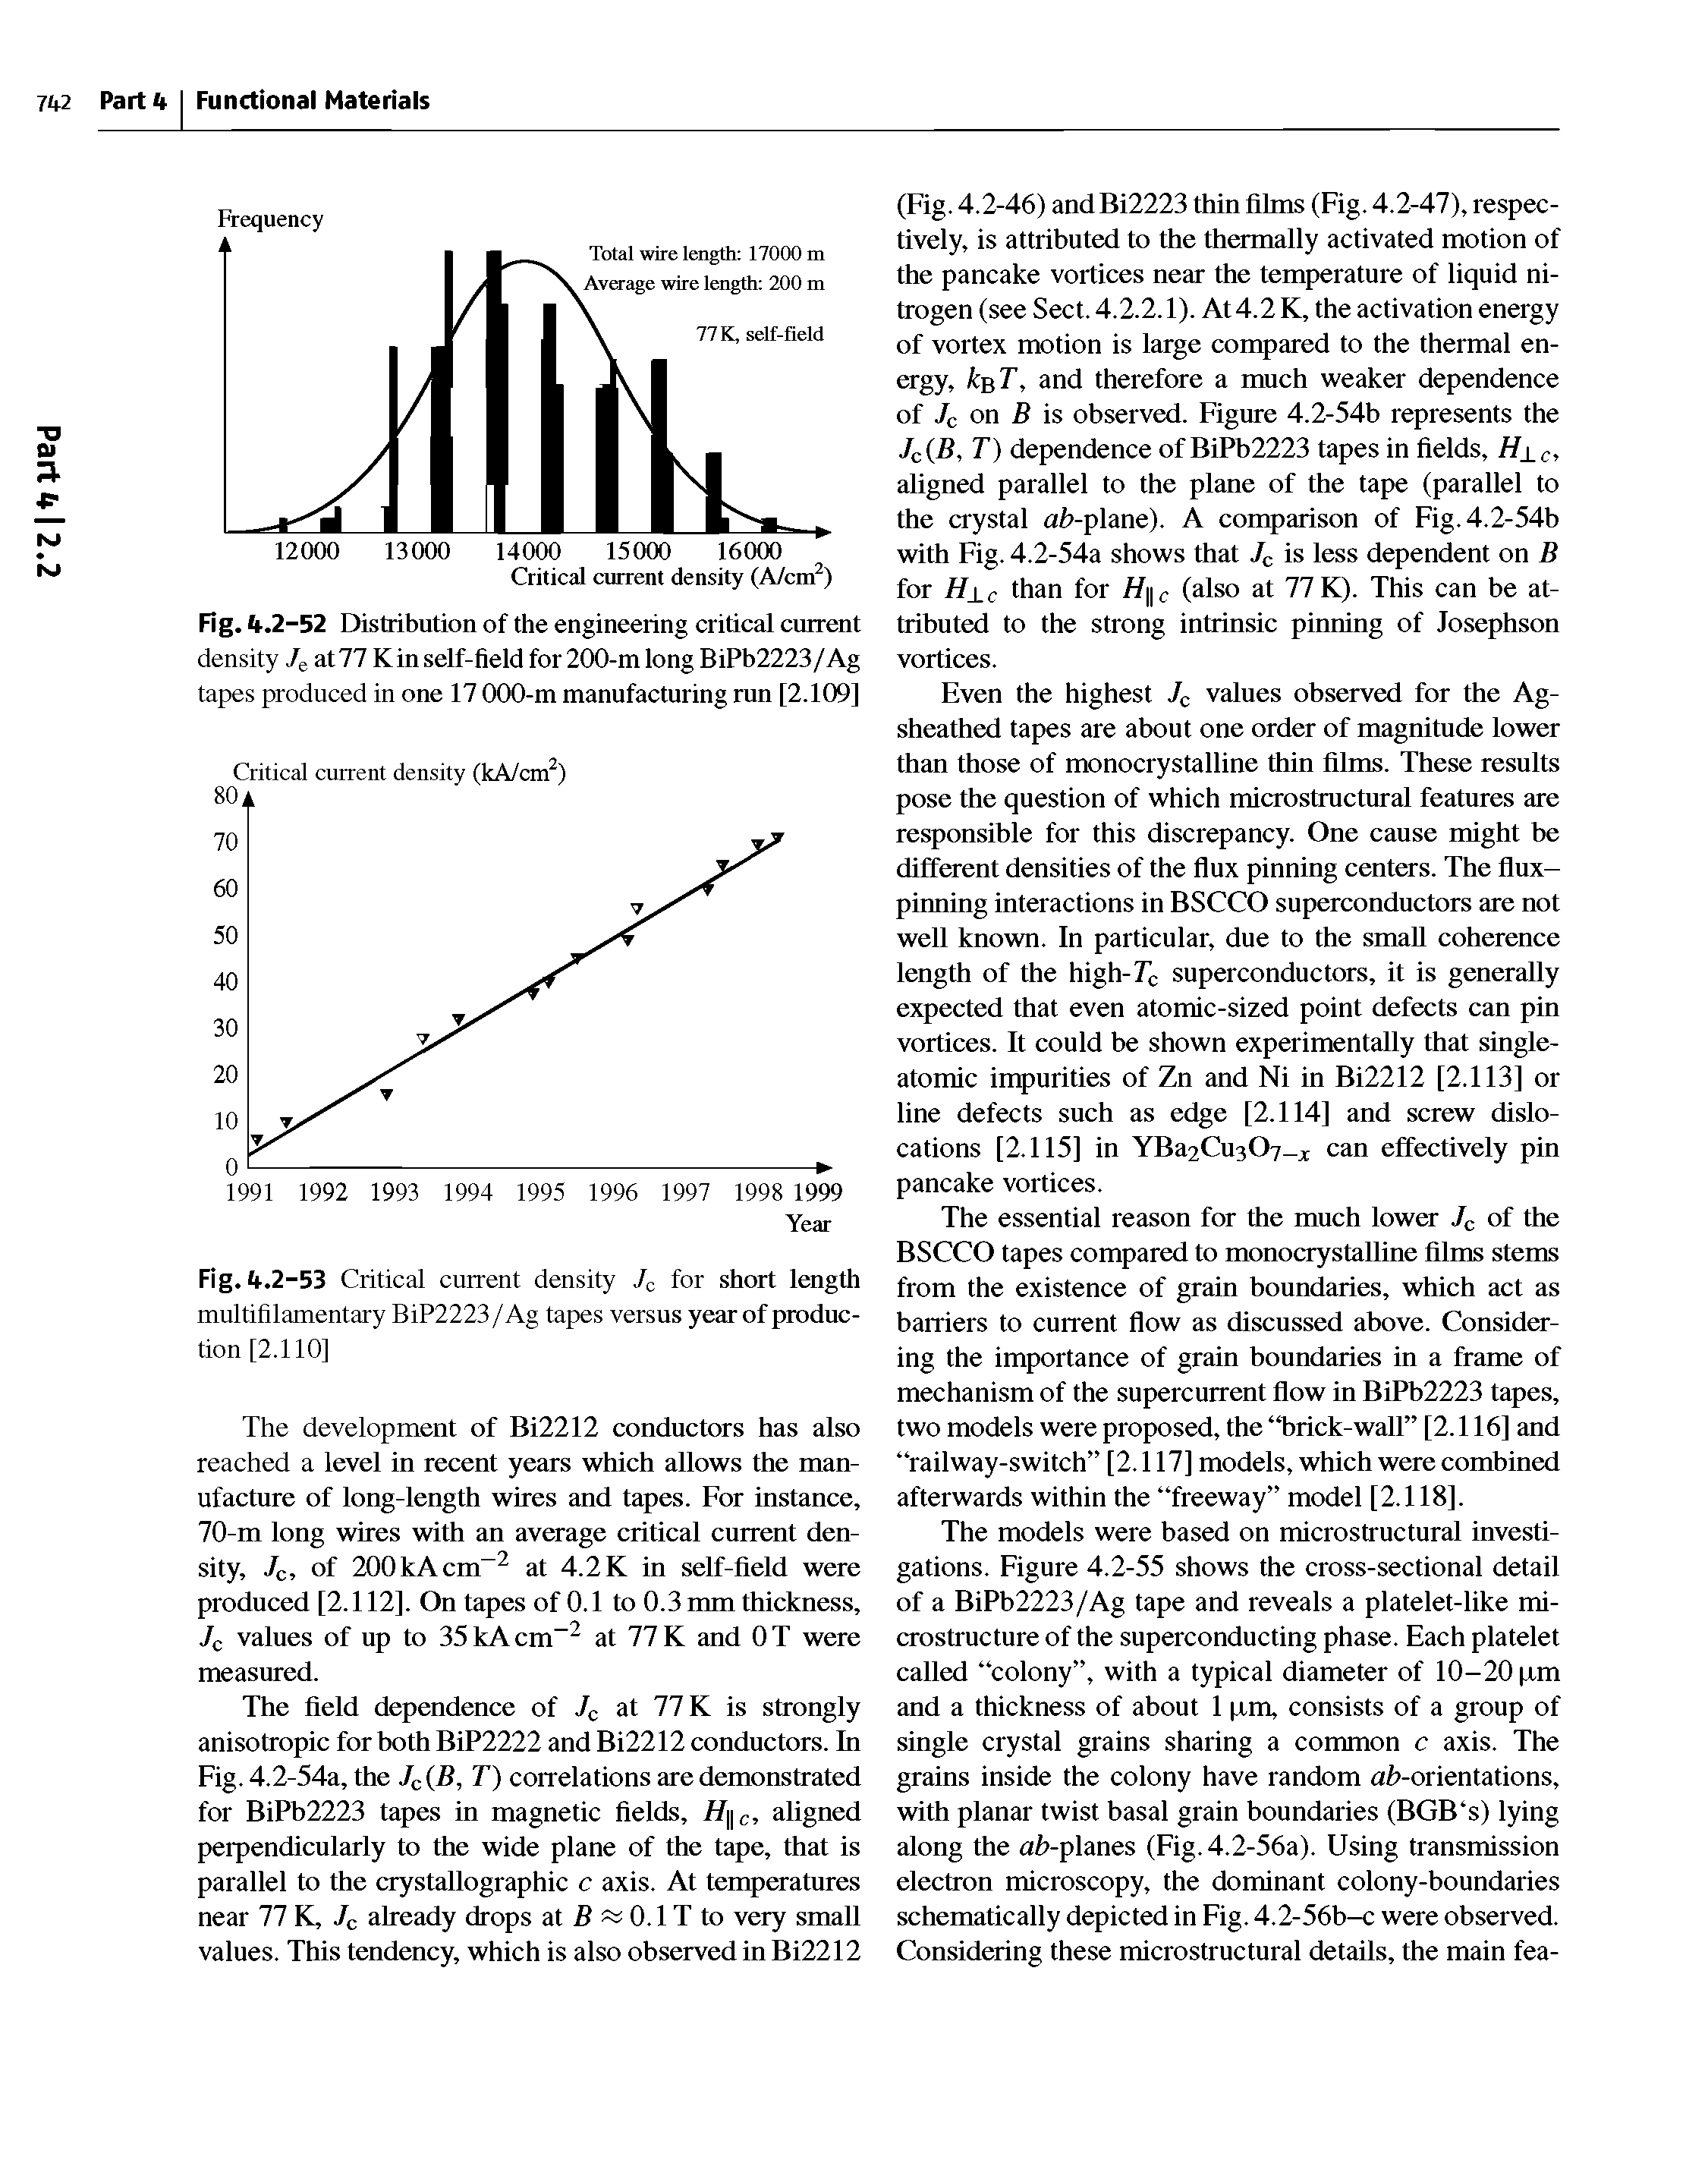 Fig. 4.2-52 Distribution of the engineering critical current density at 77 Kin self-field for 200-m long BiPb2223/Ag tapes produced in one 17 000-m manufacturing run [2.109]...